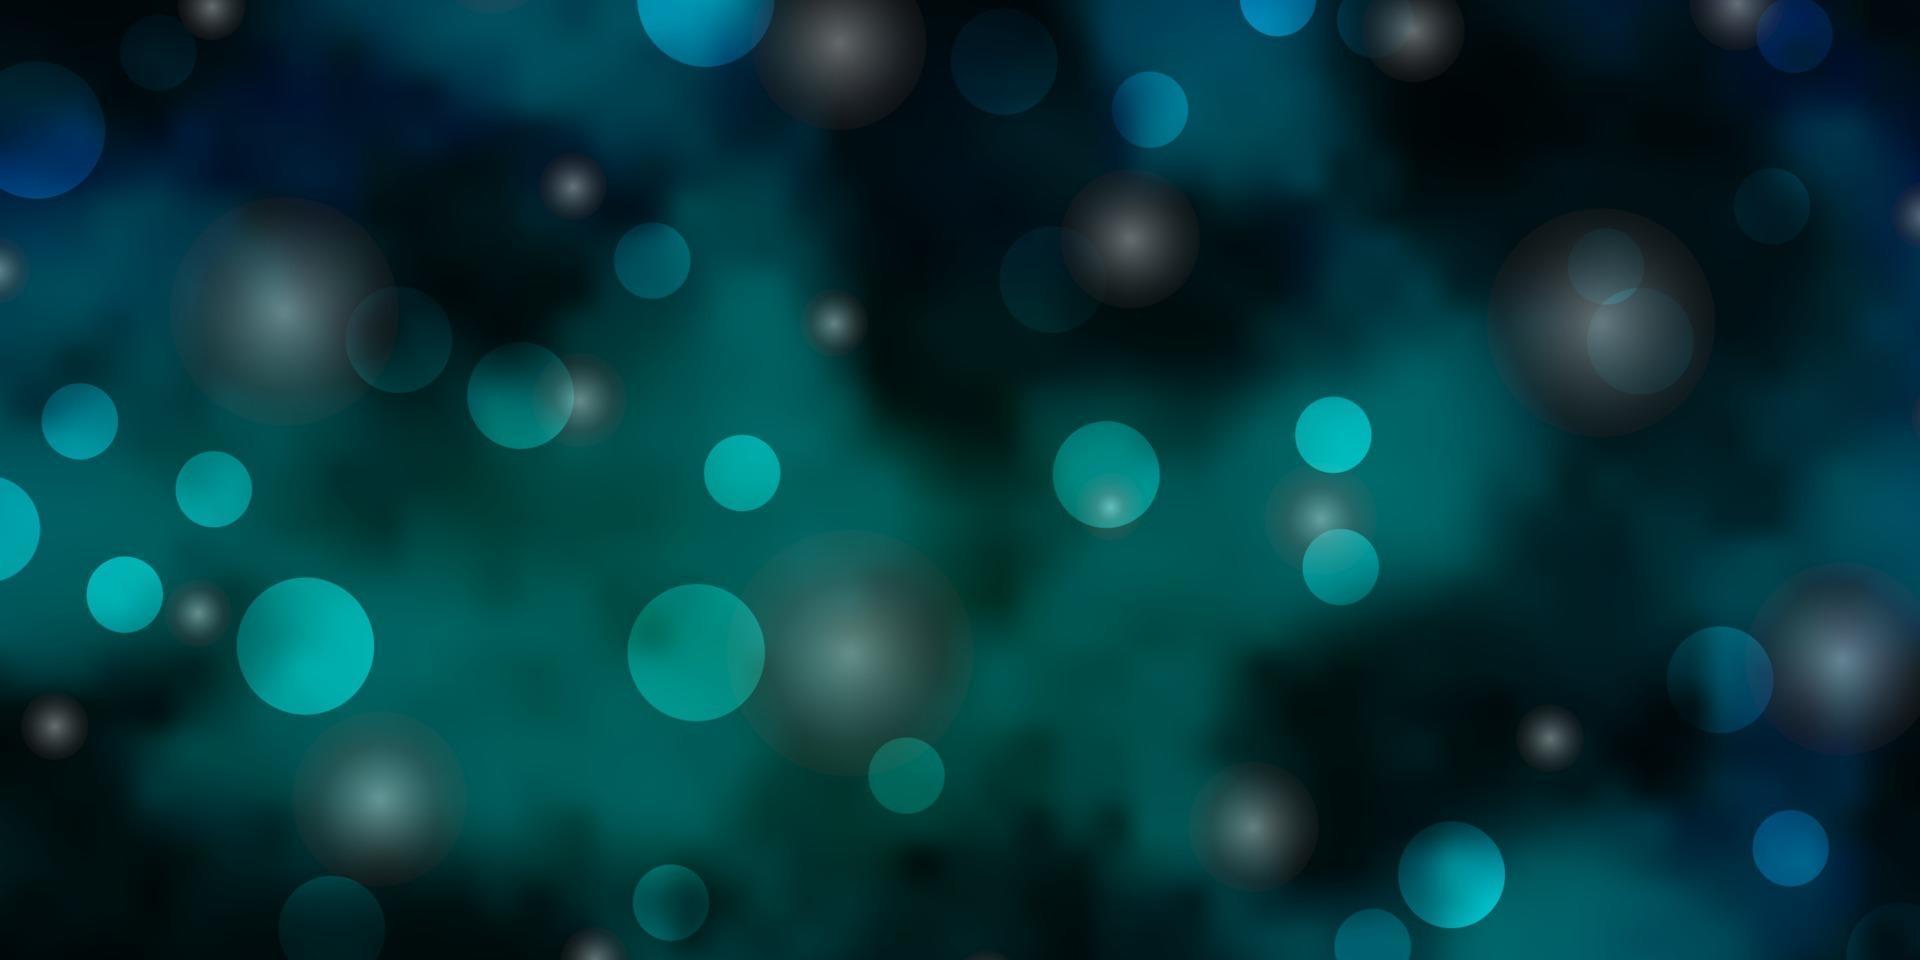 Light BLUE vector pattern with circles, stars.